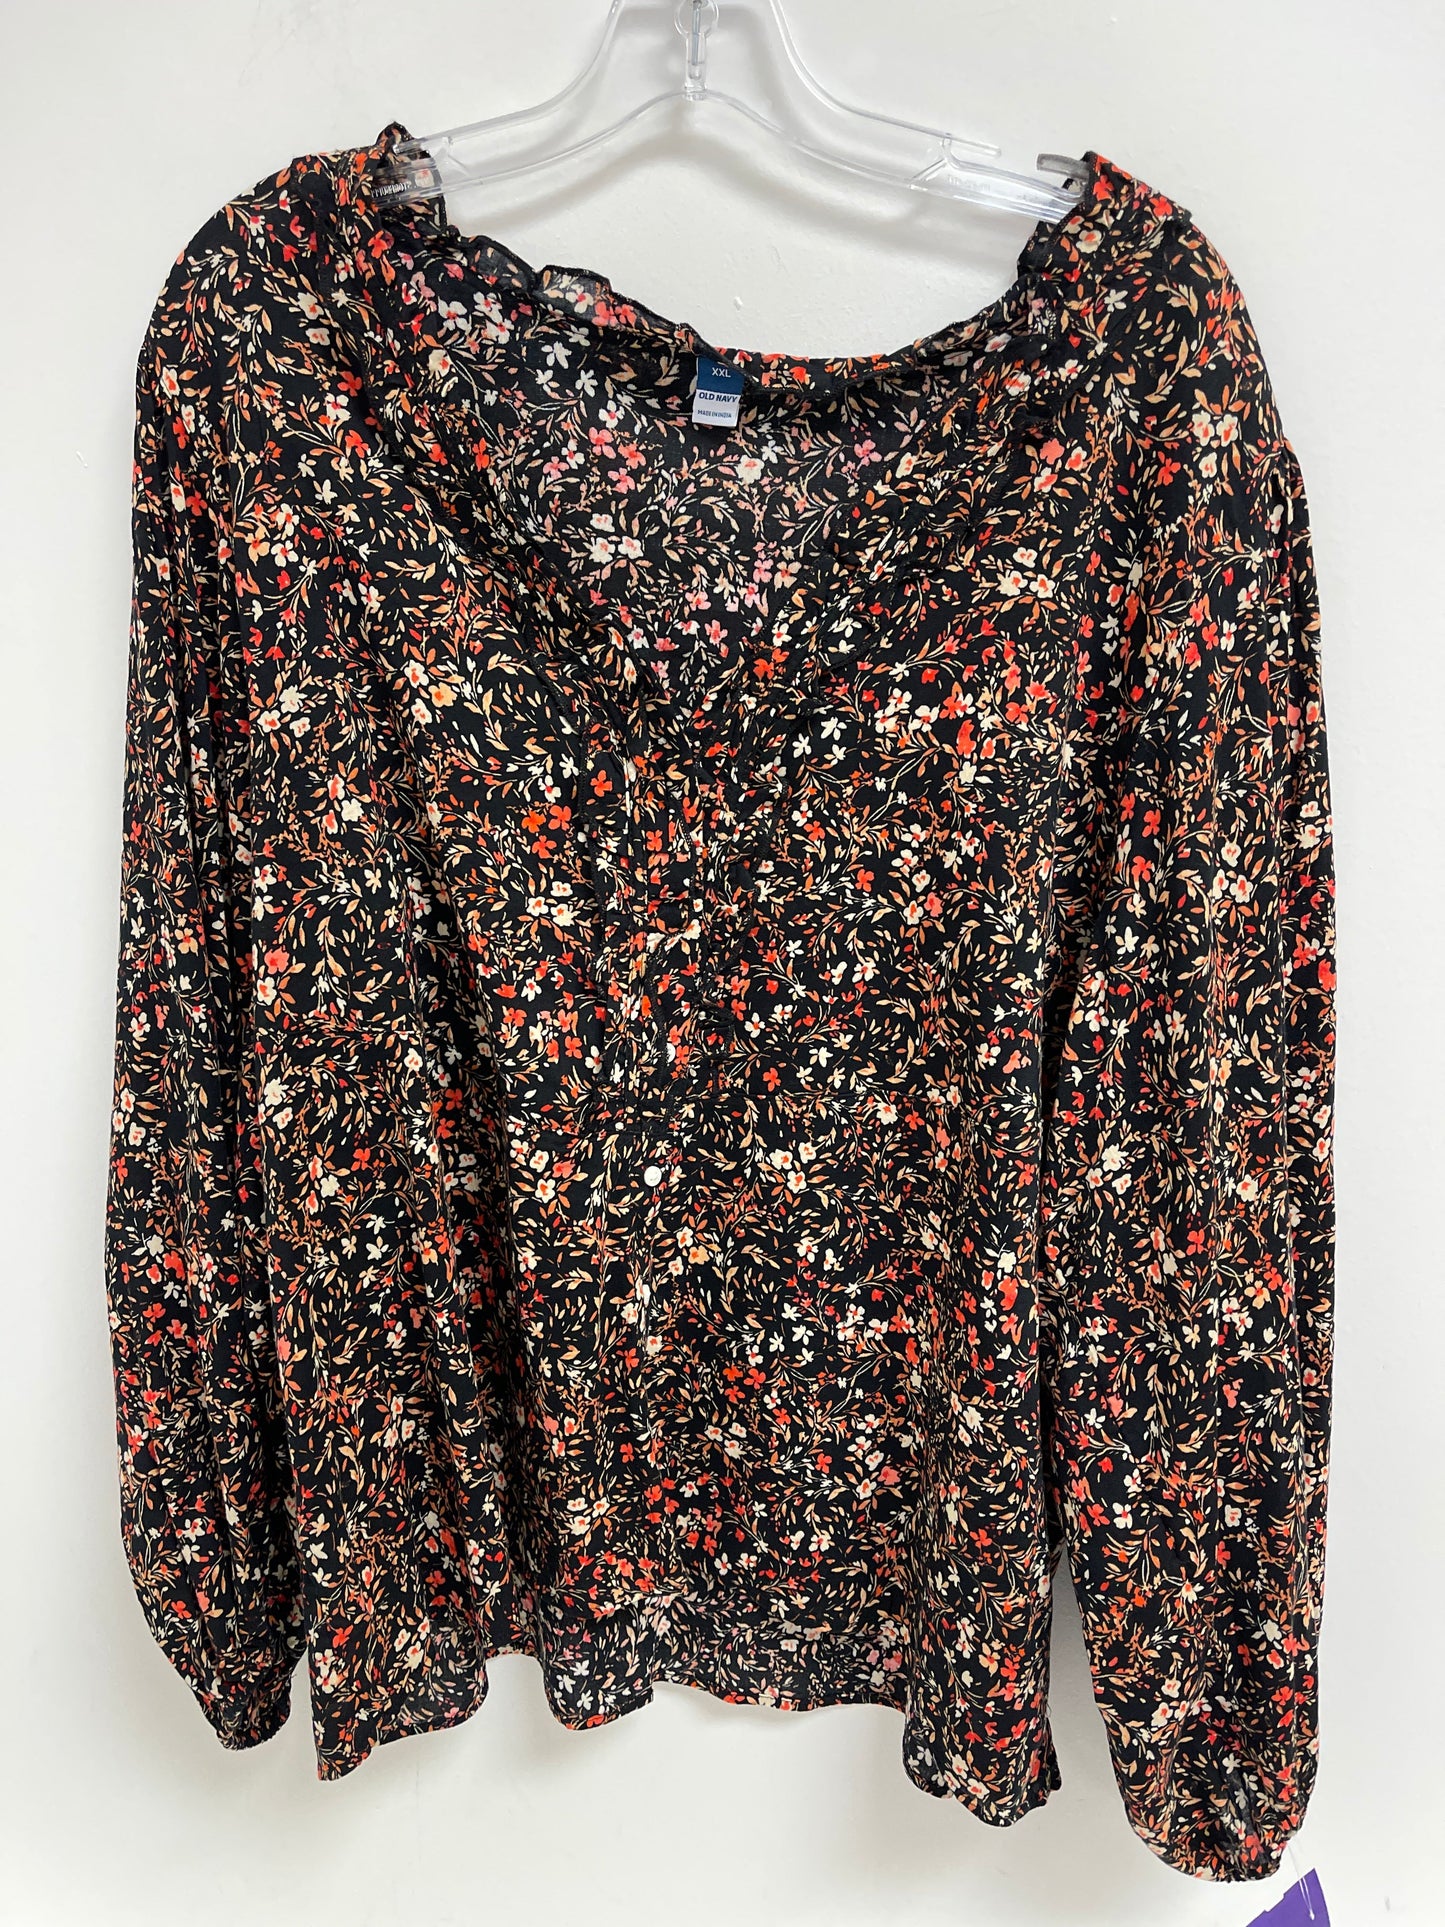 Floral Print Top Long Sleeve Old Navy, Size 2x